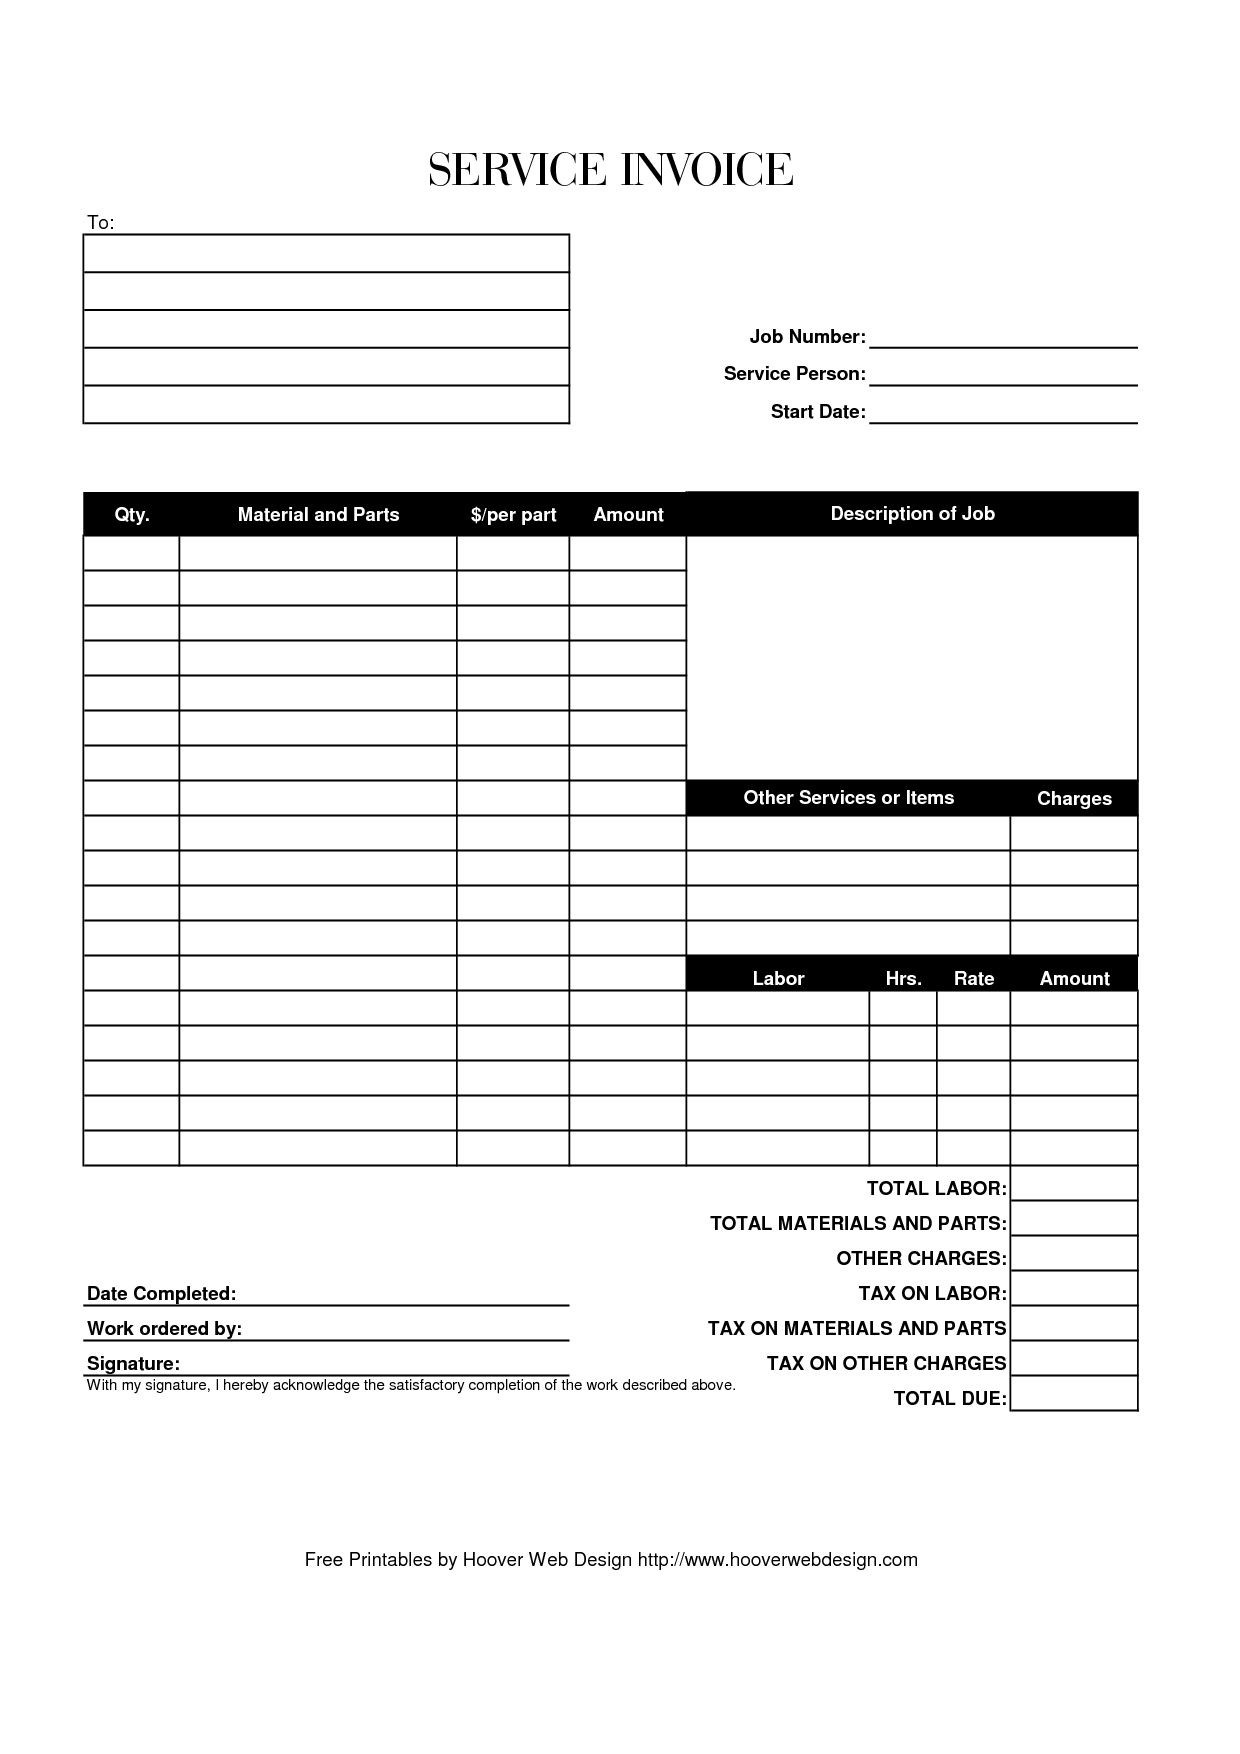 Free Printable Invoice Template New Free Printable Invoice Template - Free Printable Invoice Templates